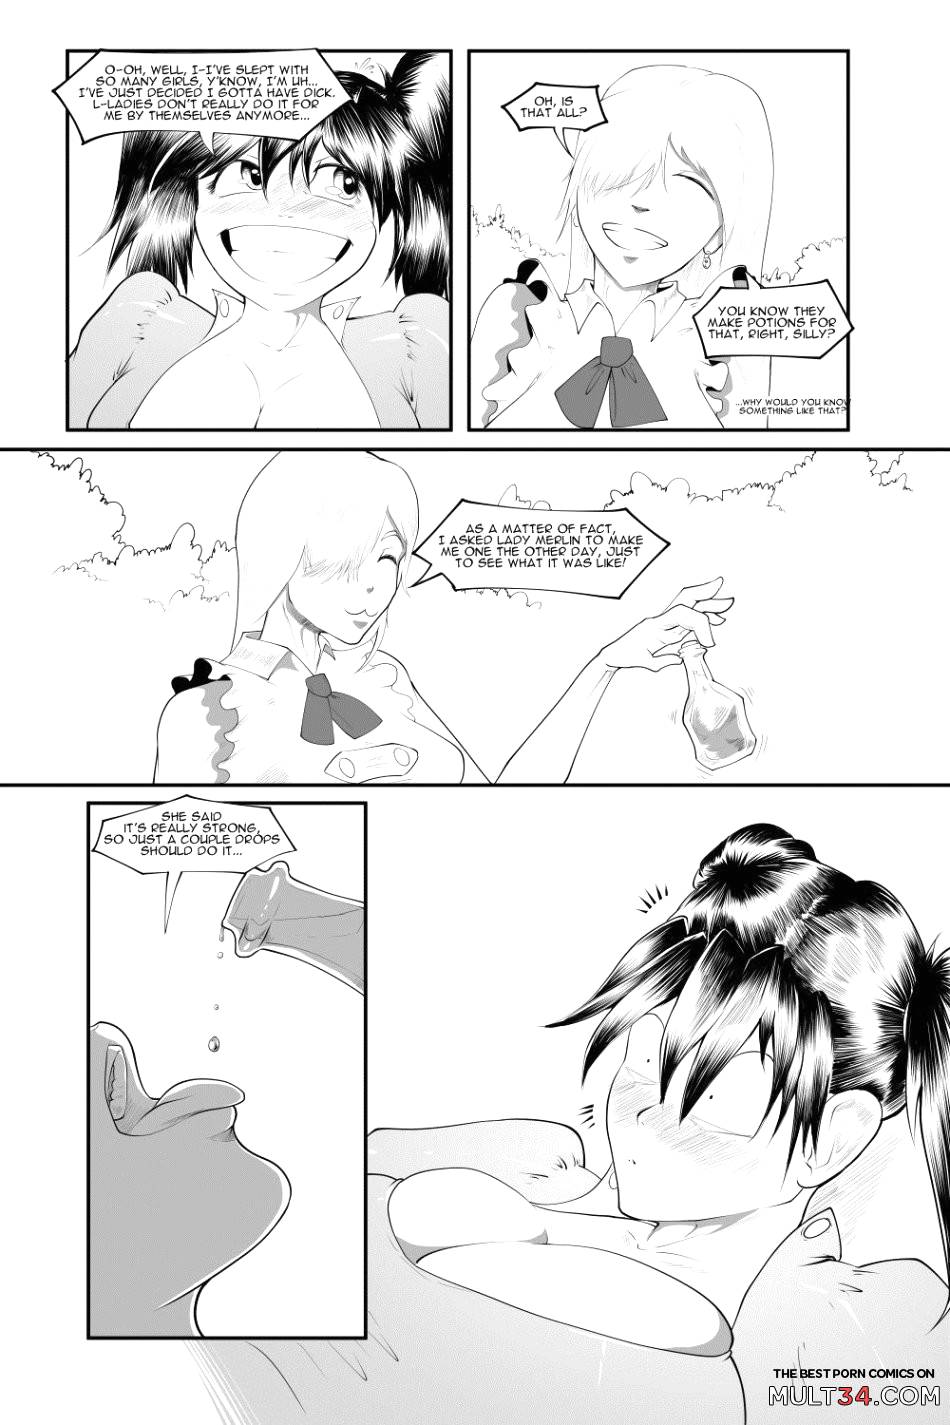 The Seven Dirty Sins page 3